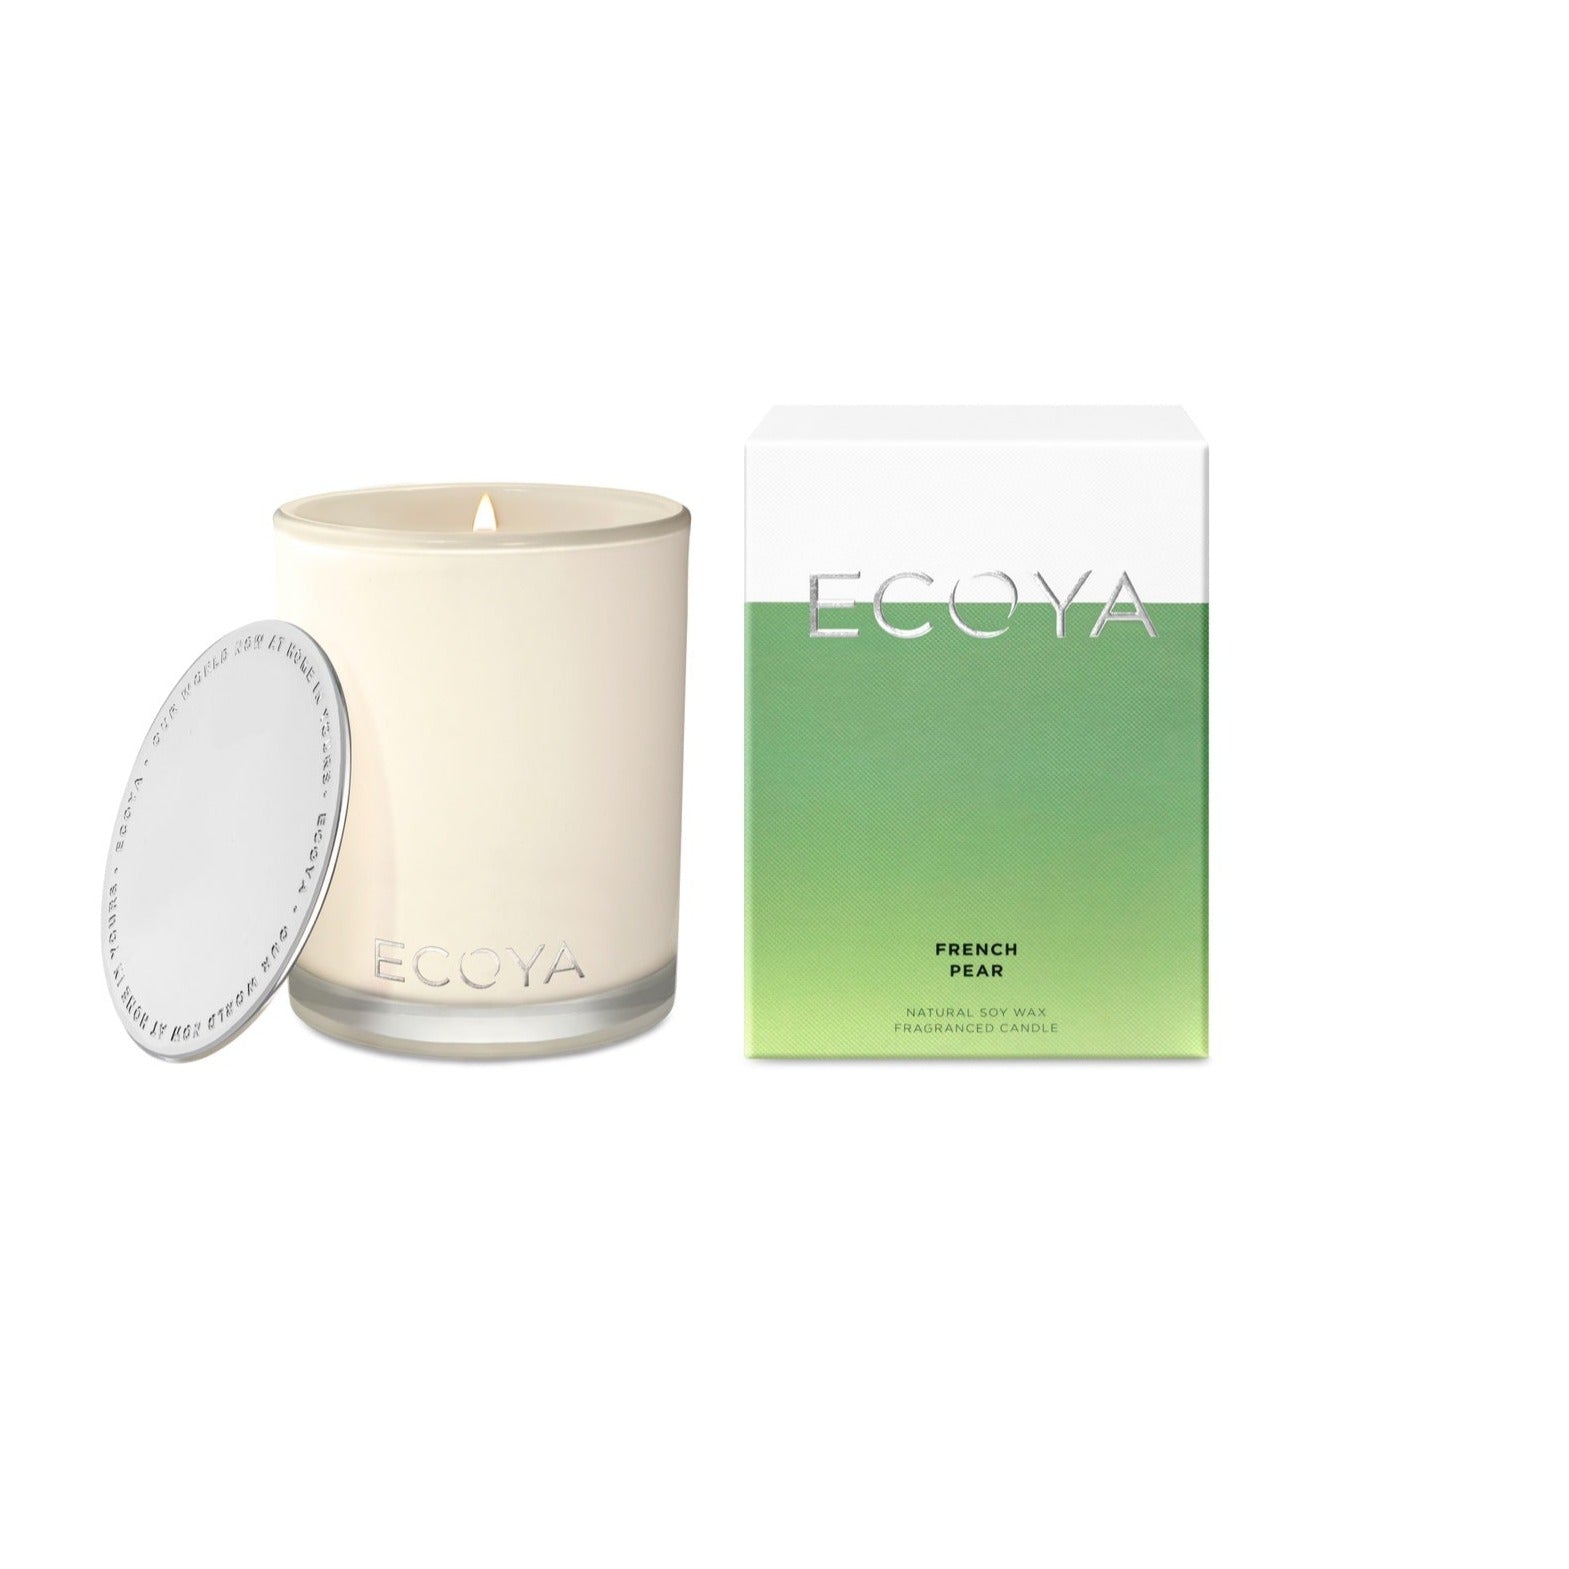 French Pear Madison Candle